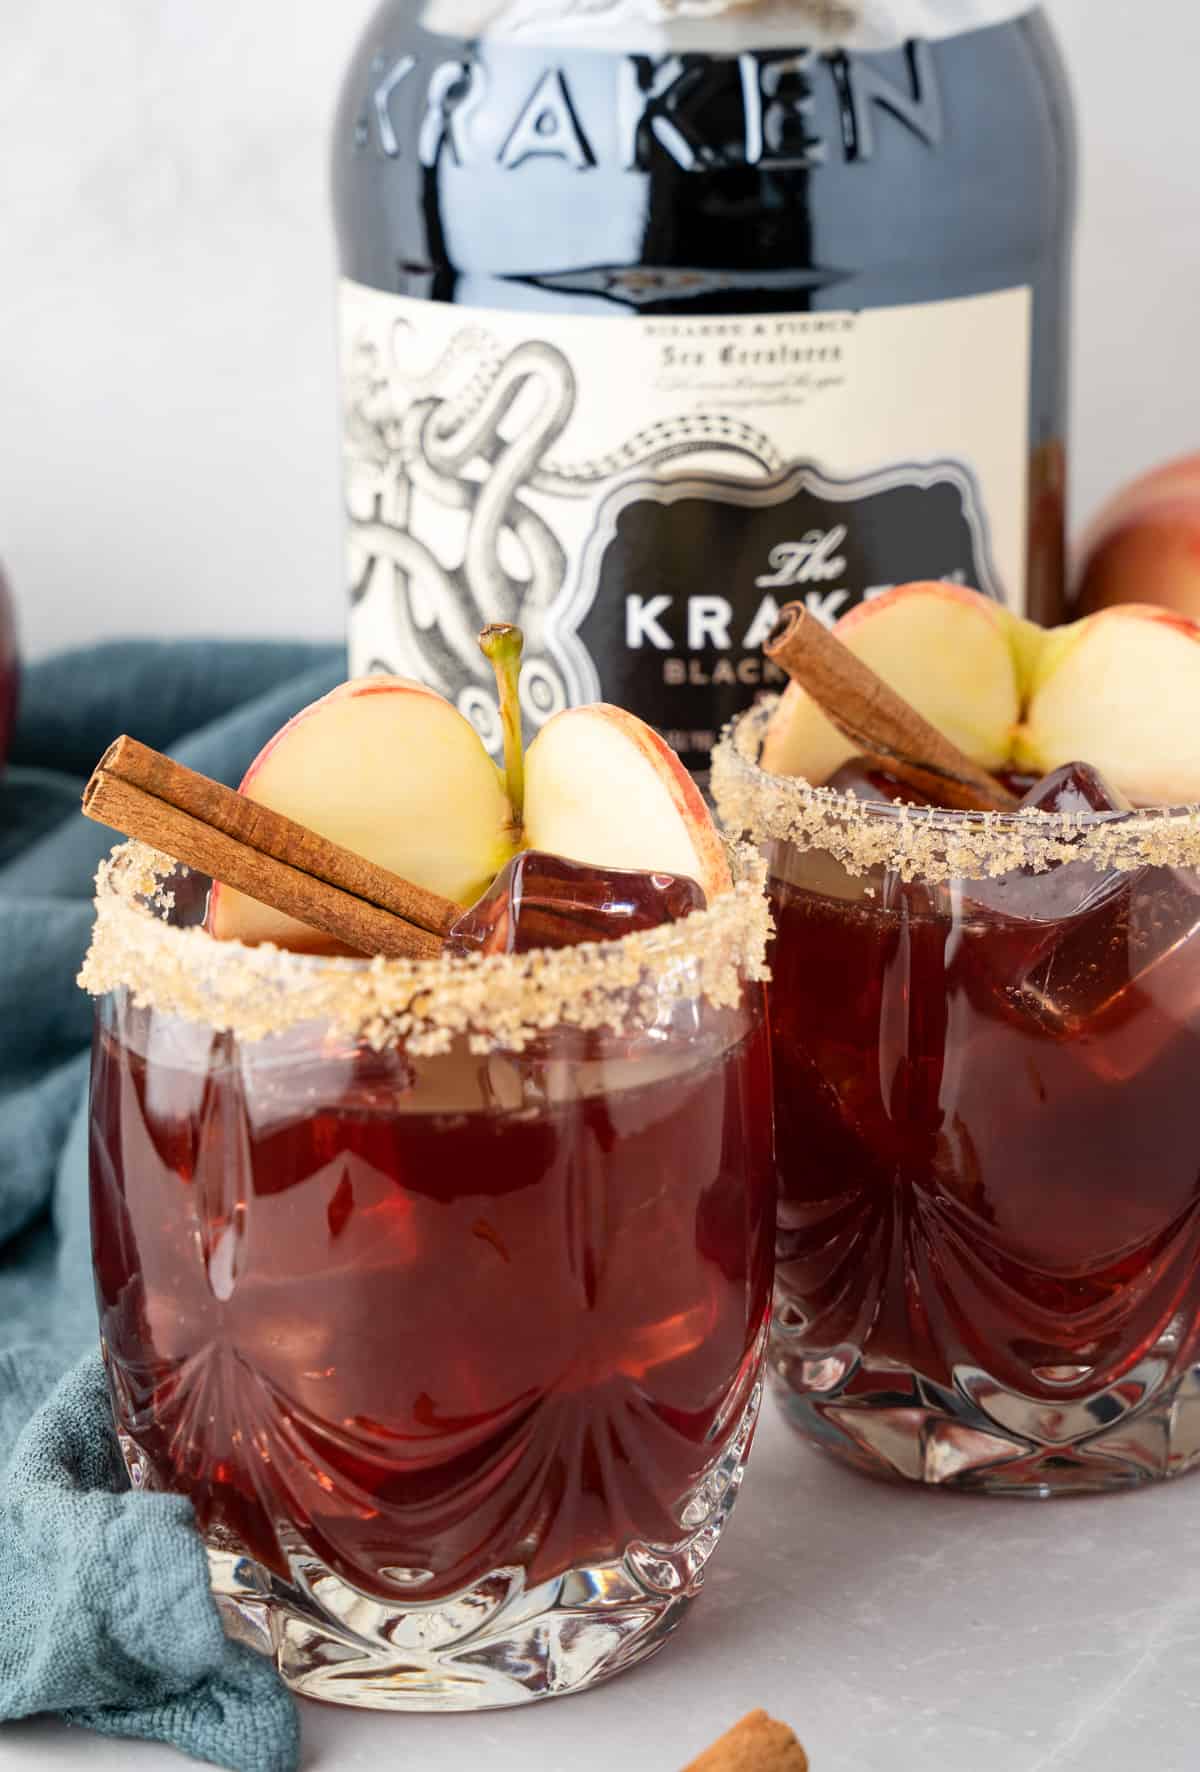 Two glasses of Apple Cider Sangria with brown sugar rim and garnished with sliced apple and cinnamon stick.